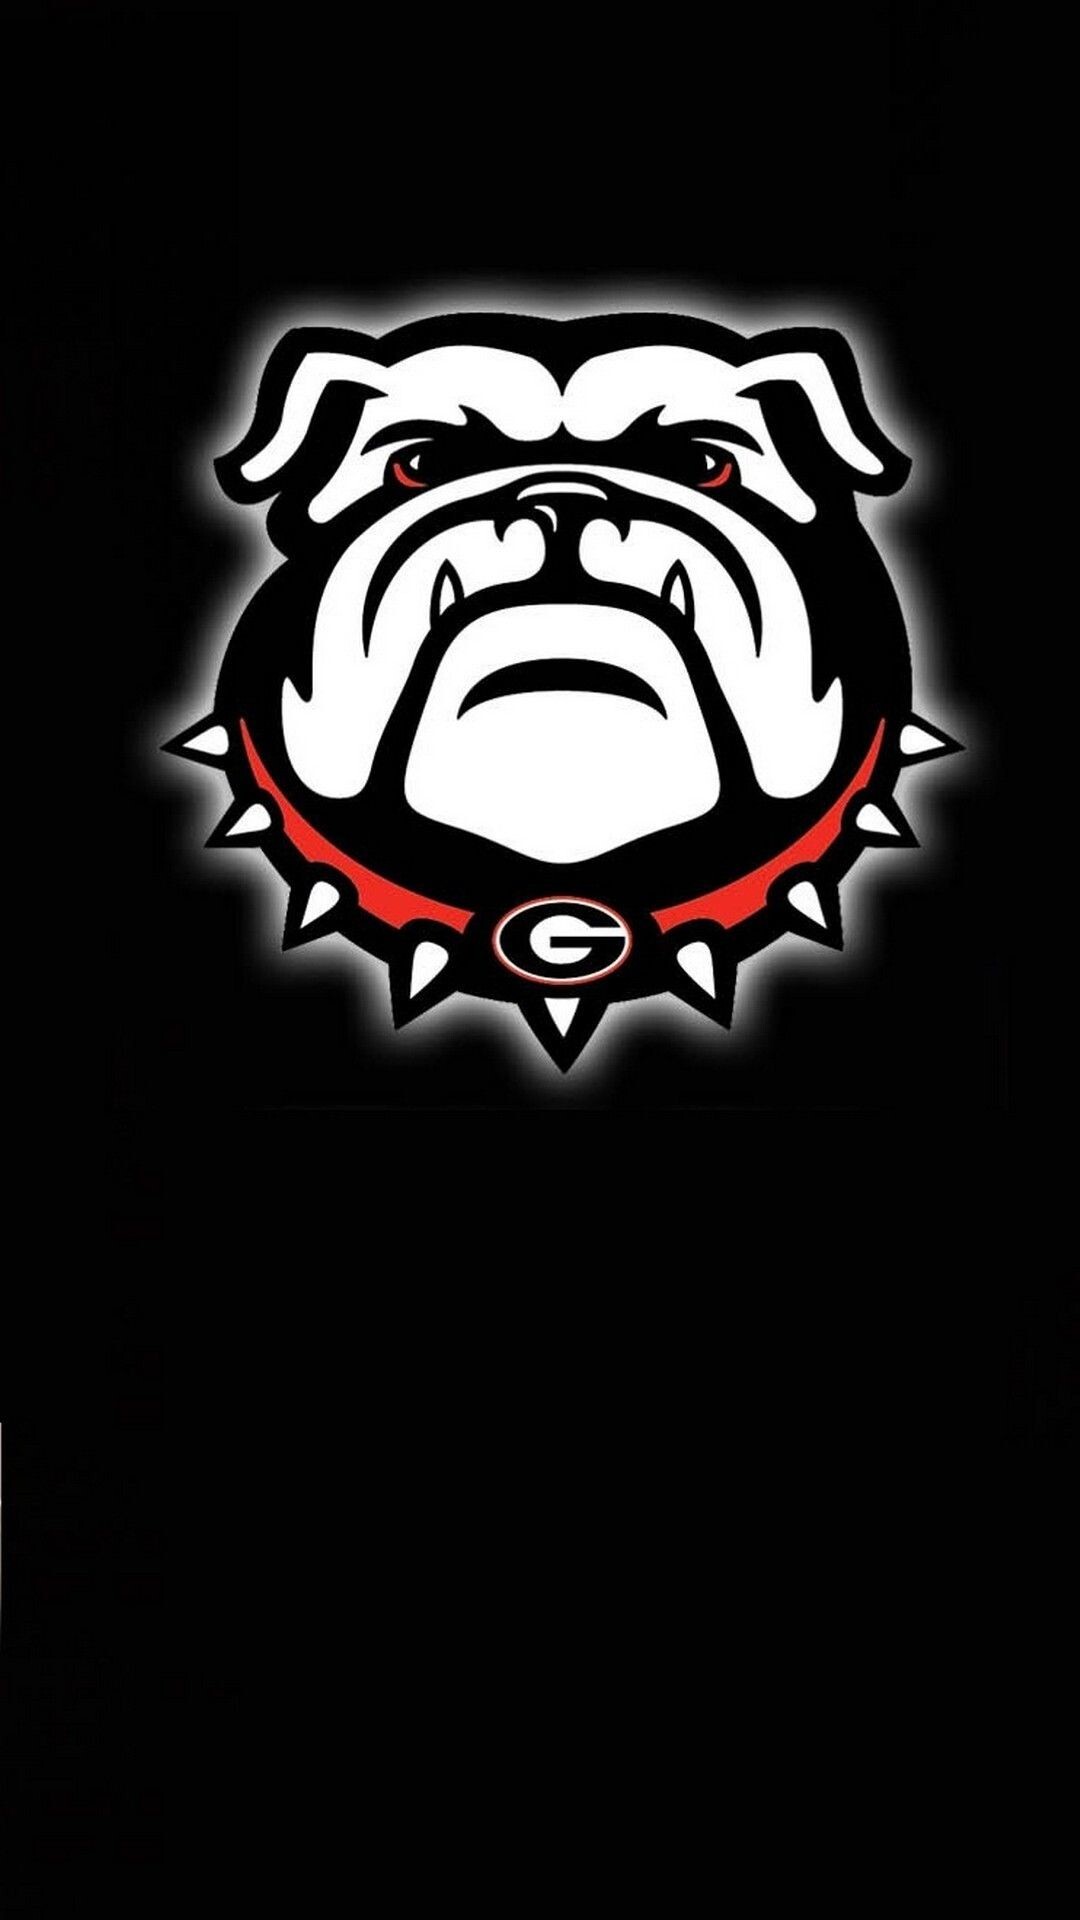 Georgia Bulldogs: Member of the Southeastern Conference, The only undefeated team in 1980. 1080x1920 Full HD Wallpaper.